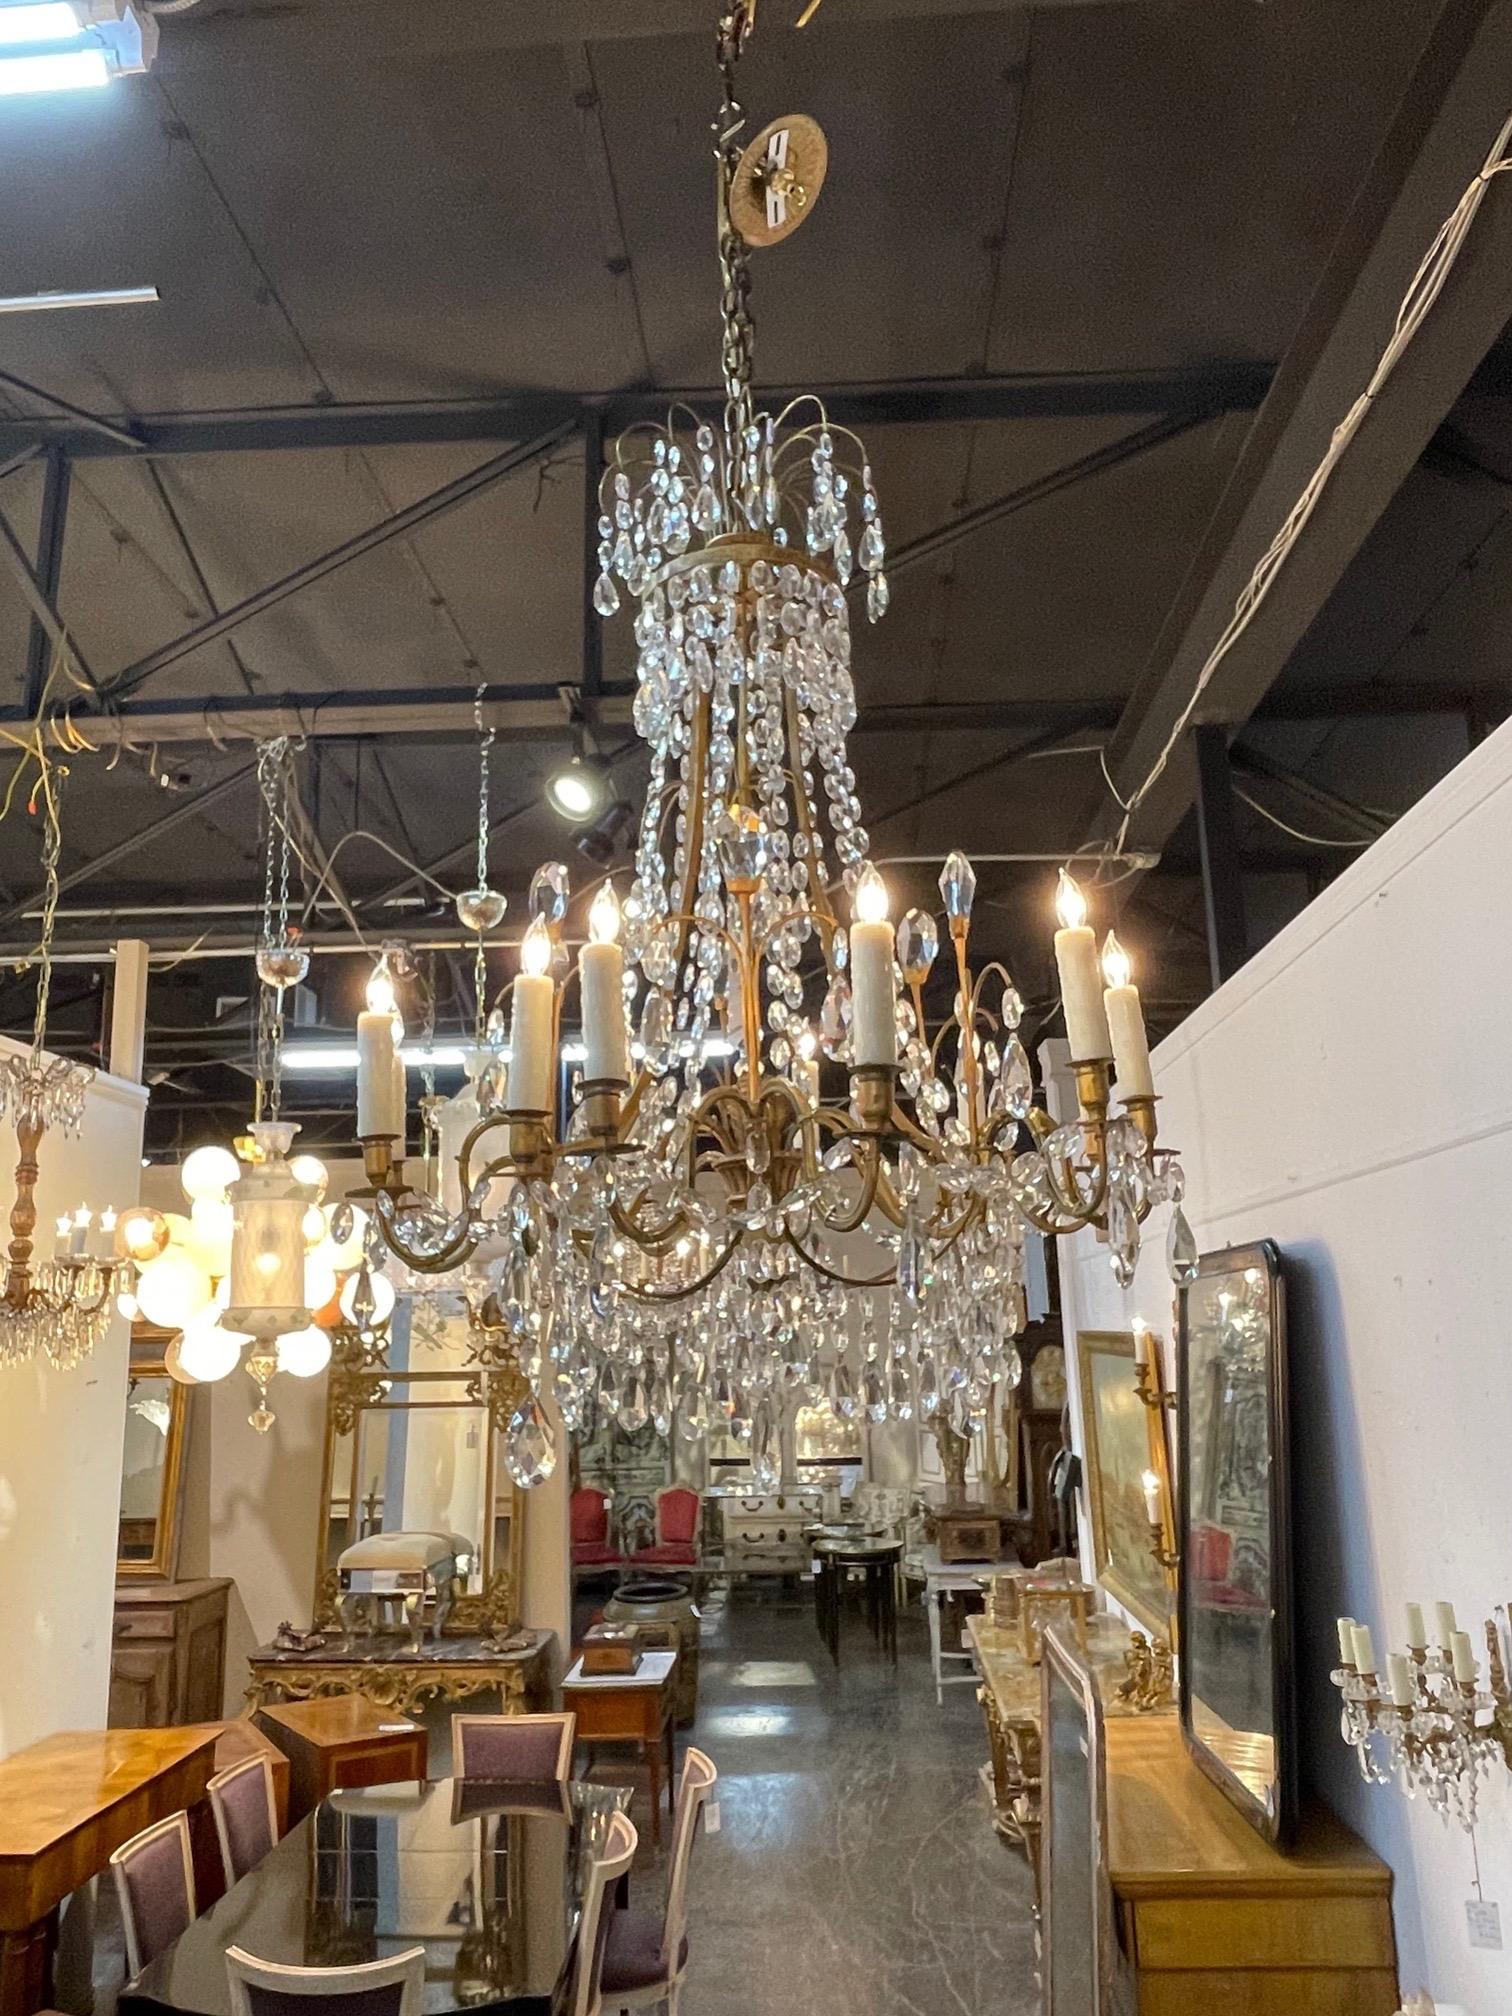 Exceptional 19th century Swedish neo=classical beaded crystal chandelier with 12 lights. This piece is covered in gorgeous crystals and has a beautiful scale and shape. Stunning!